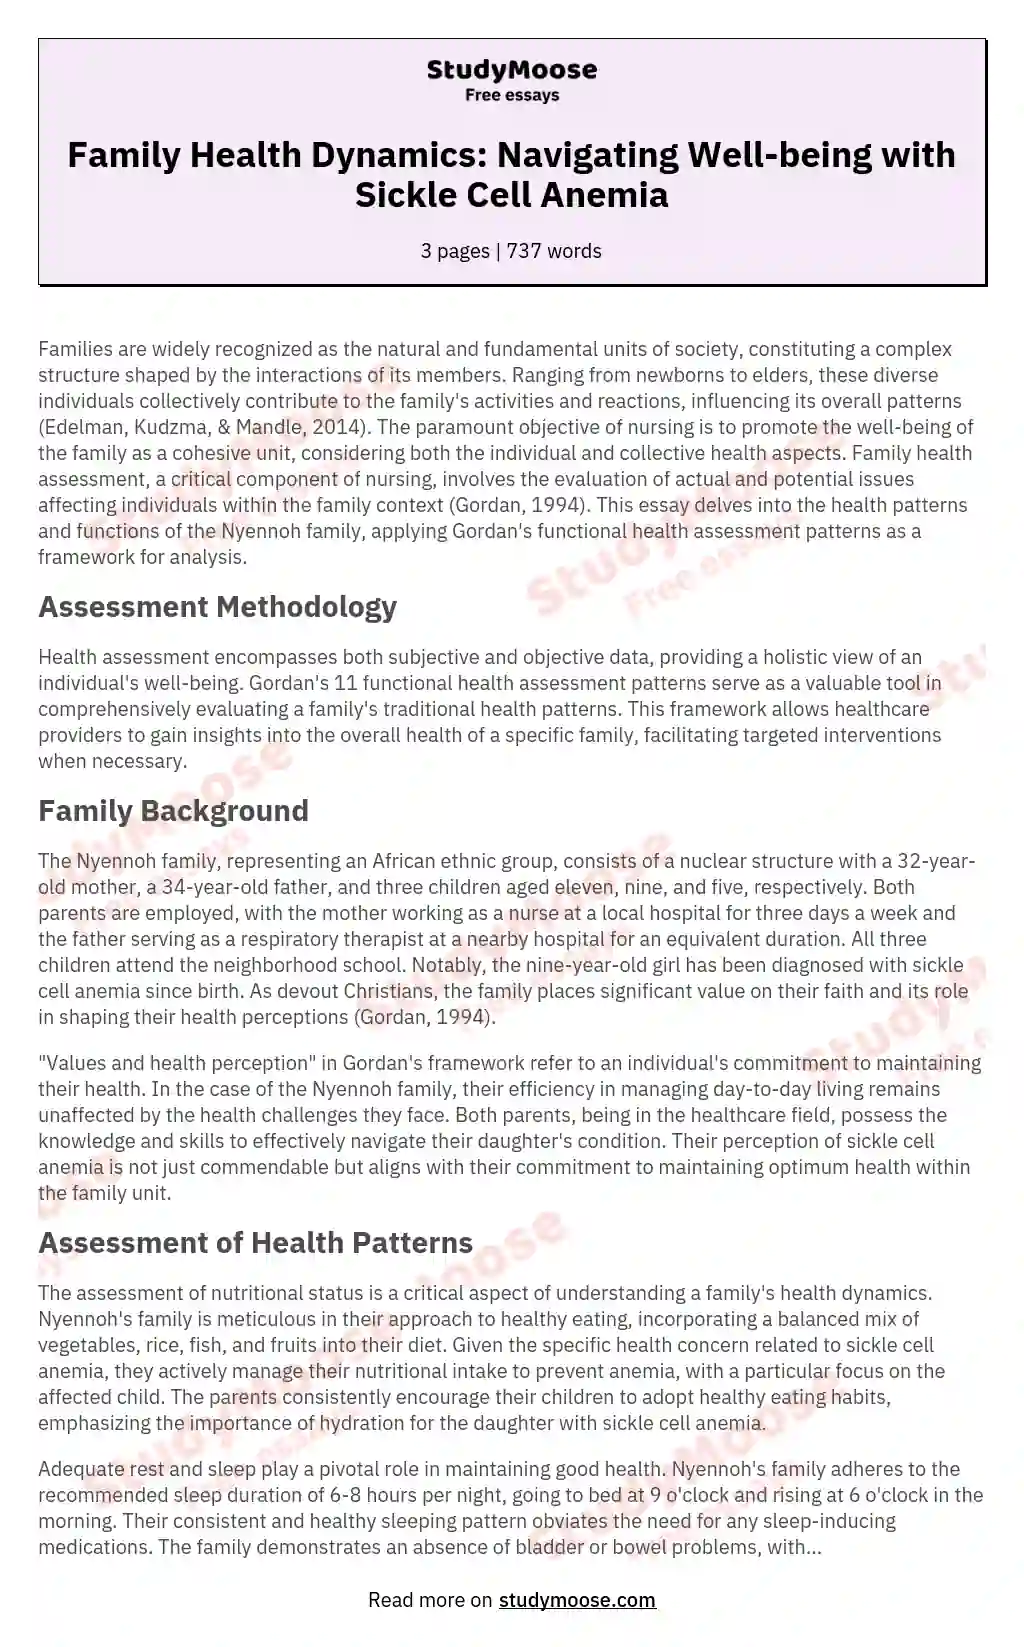 Family Health Dynamics: Navigating Well-being with Sickle Cell Anemia essay